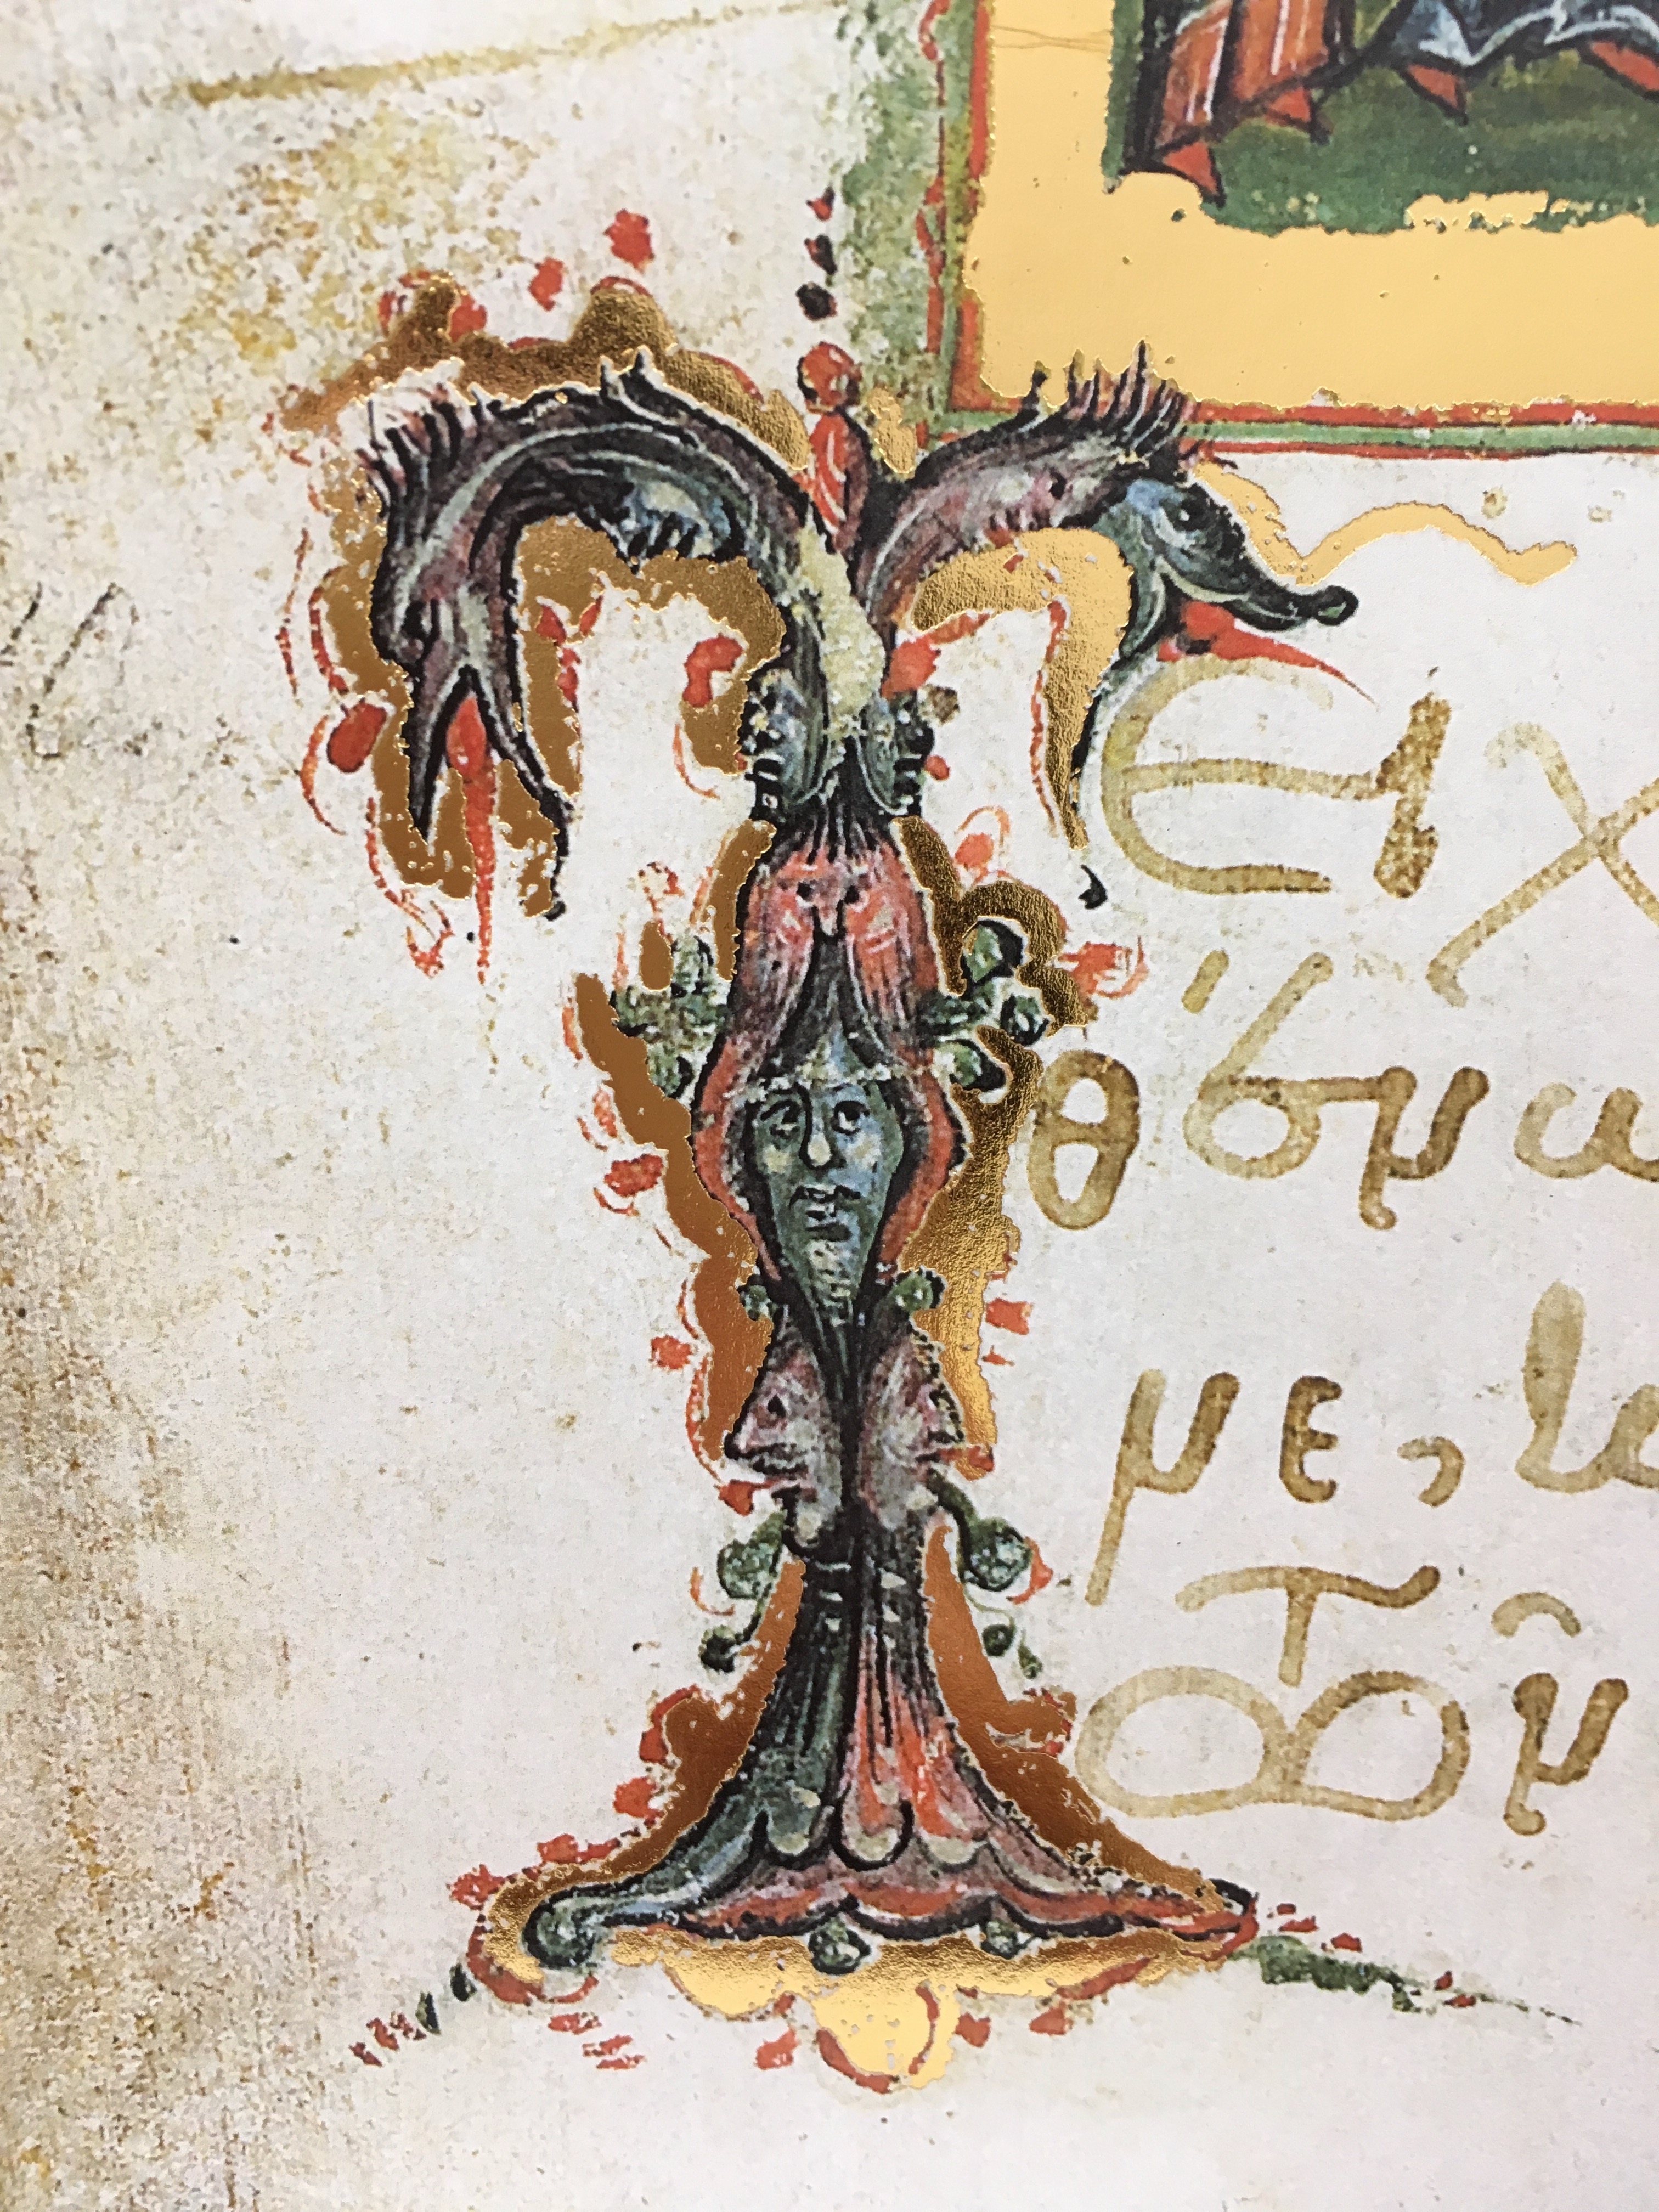 Zoomorphic initial letter, Moscow, State Historical Museum, Synod. gr. 429, fol. 26v, 14th or early 15th century. Photograph by Olga Yunak from a facsimile copy.